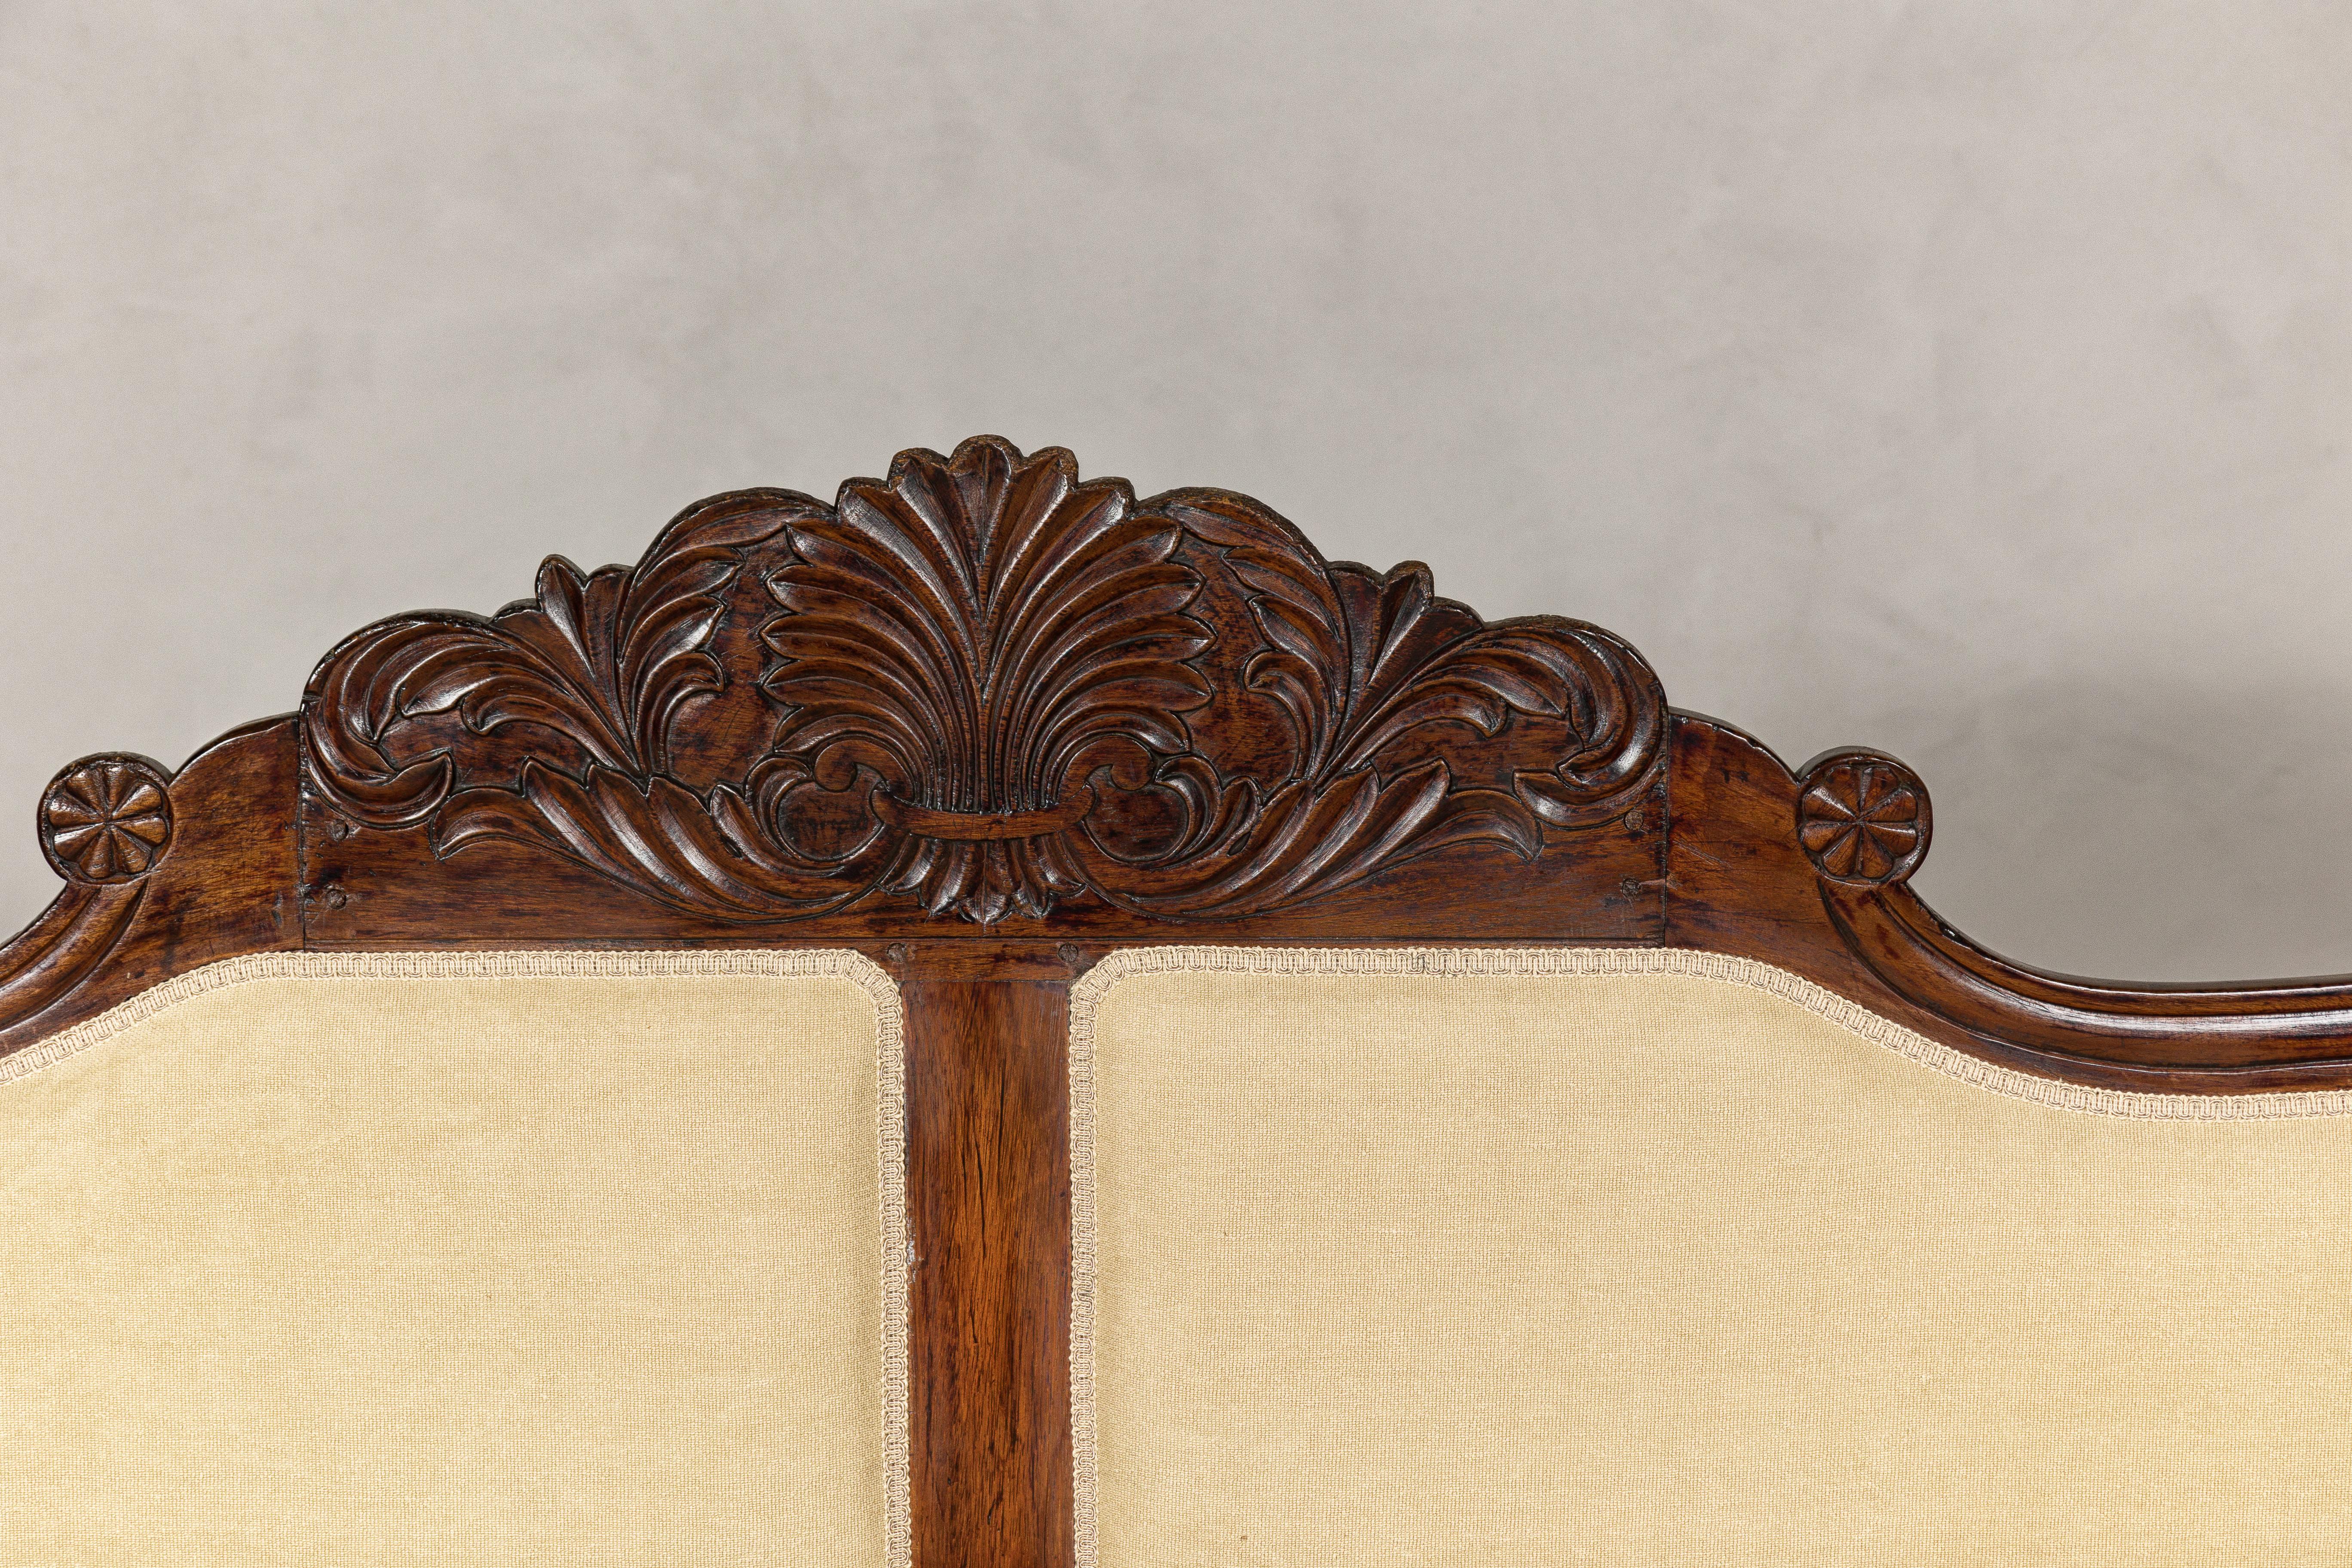 Dutch Colonial Wooden Settee with Carved Crest and Out-Scrolling Arms In Good Condition For Sale In Yonkers, NY